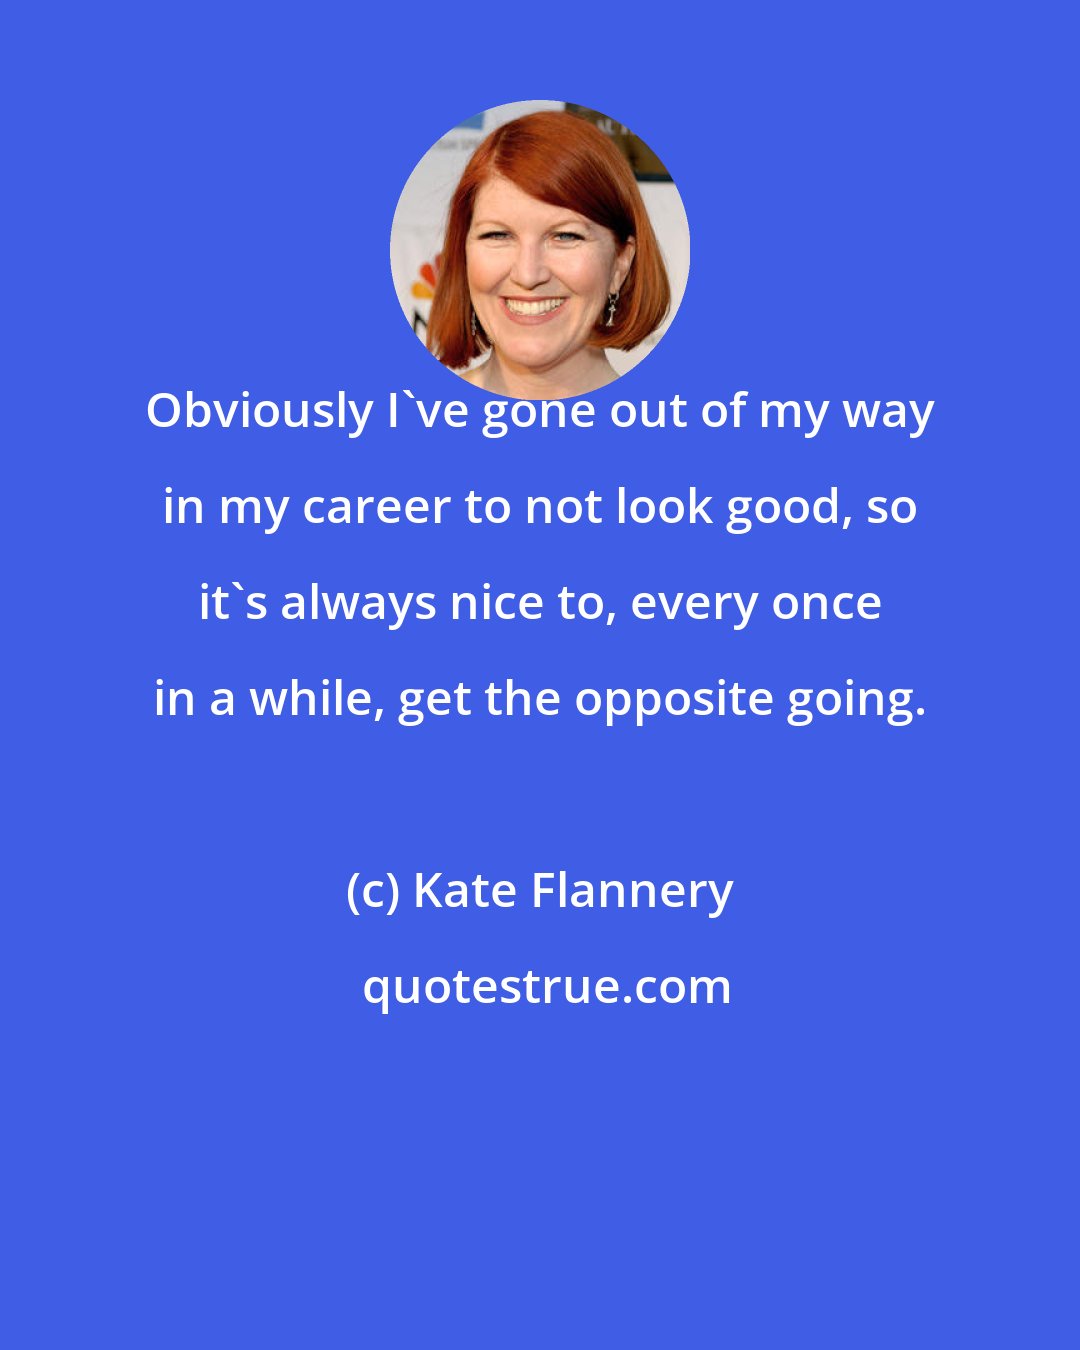 Kate Flannery: Obviously I've gone out of my way in my career to not look good, so it's always nice to, every once in a while, get the opposite going.